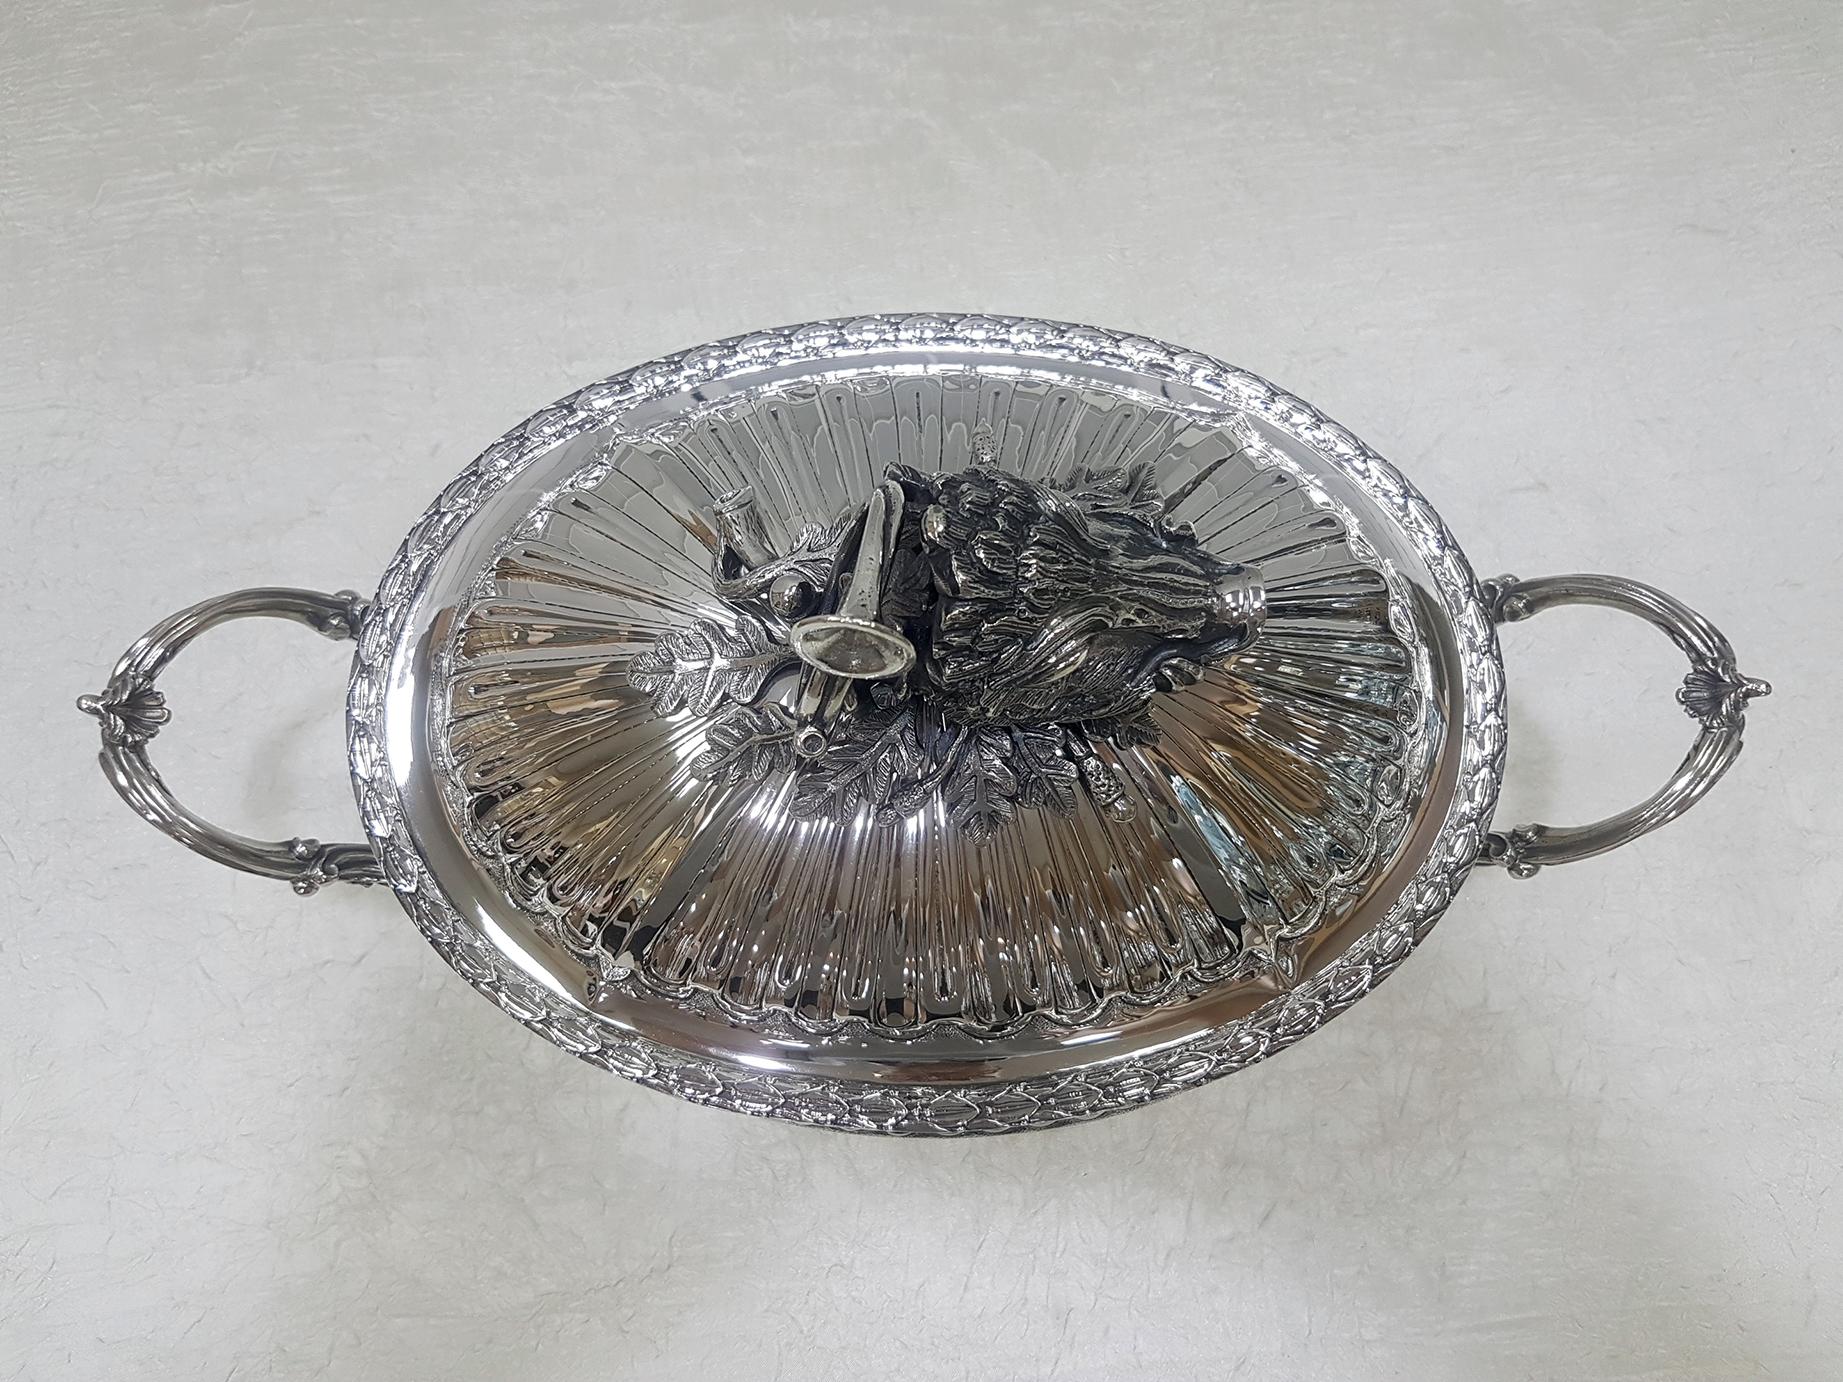 Gorgeous solid silver tureen in Empire style on feet with handles.
The body of the tureen is completely hammered by hand, embossed and chiseled with the typical designs of the Empire style.
The handle of the lid was made in fusion to depict a